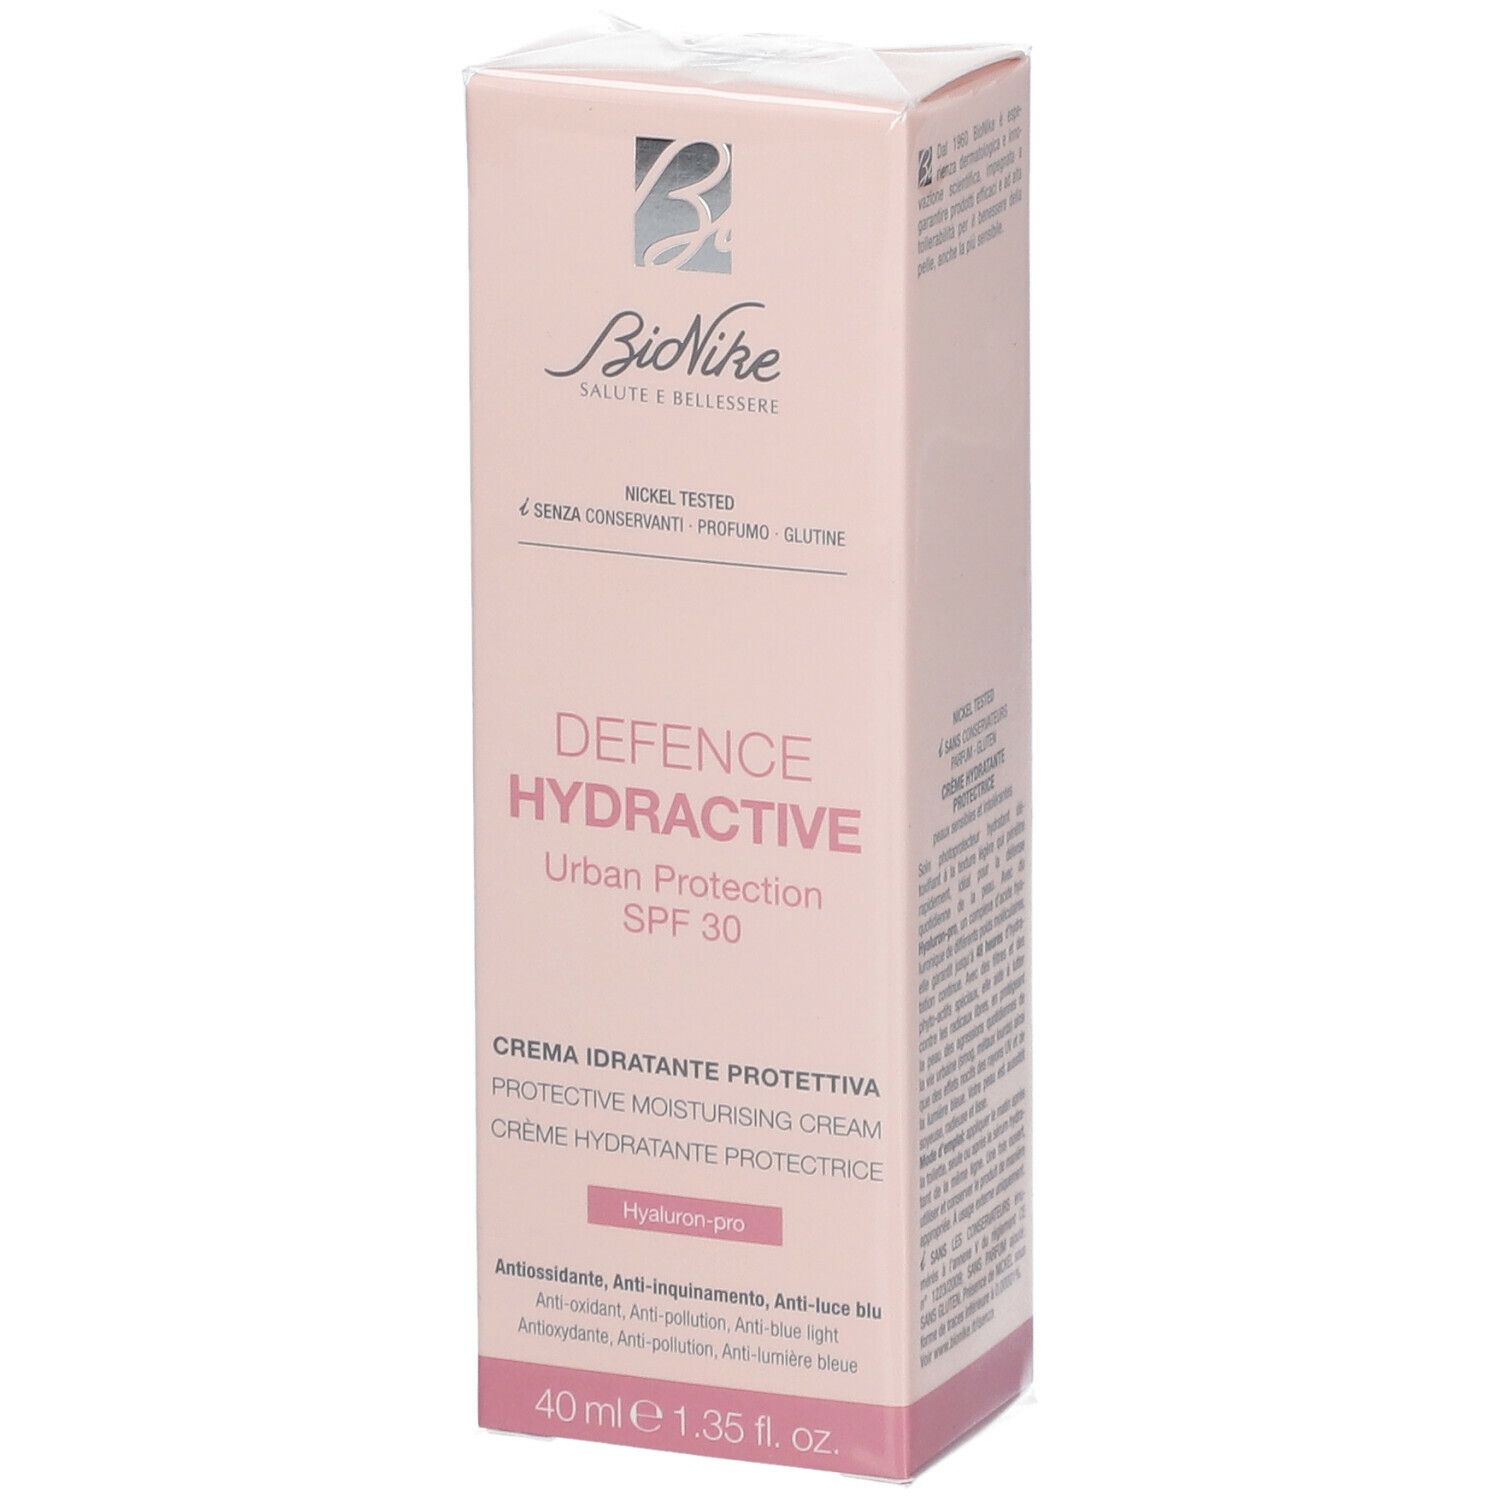 BioNike Defence Hydractive Urban Protection Crème hydratante protectrice Spf30